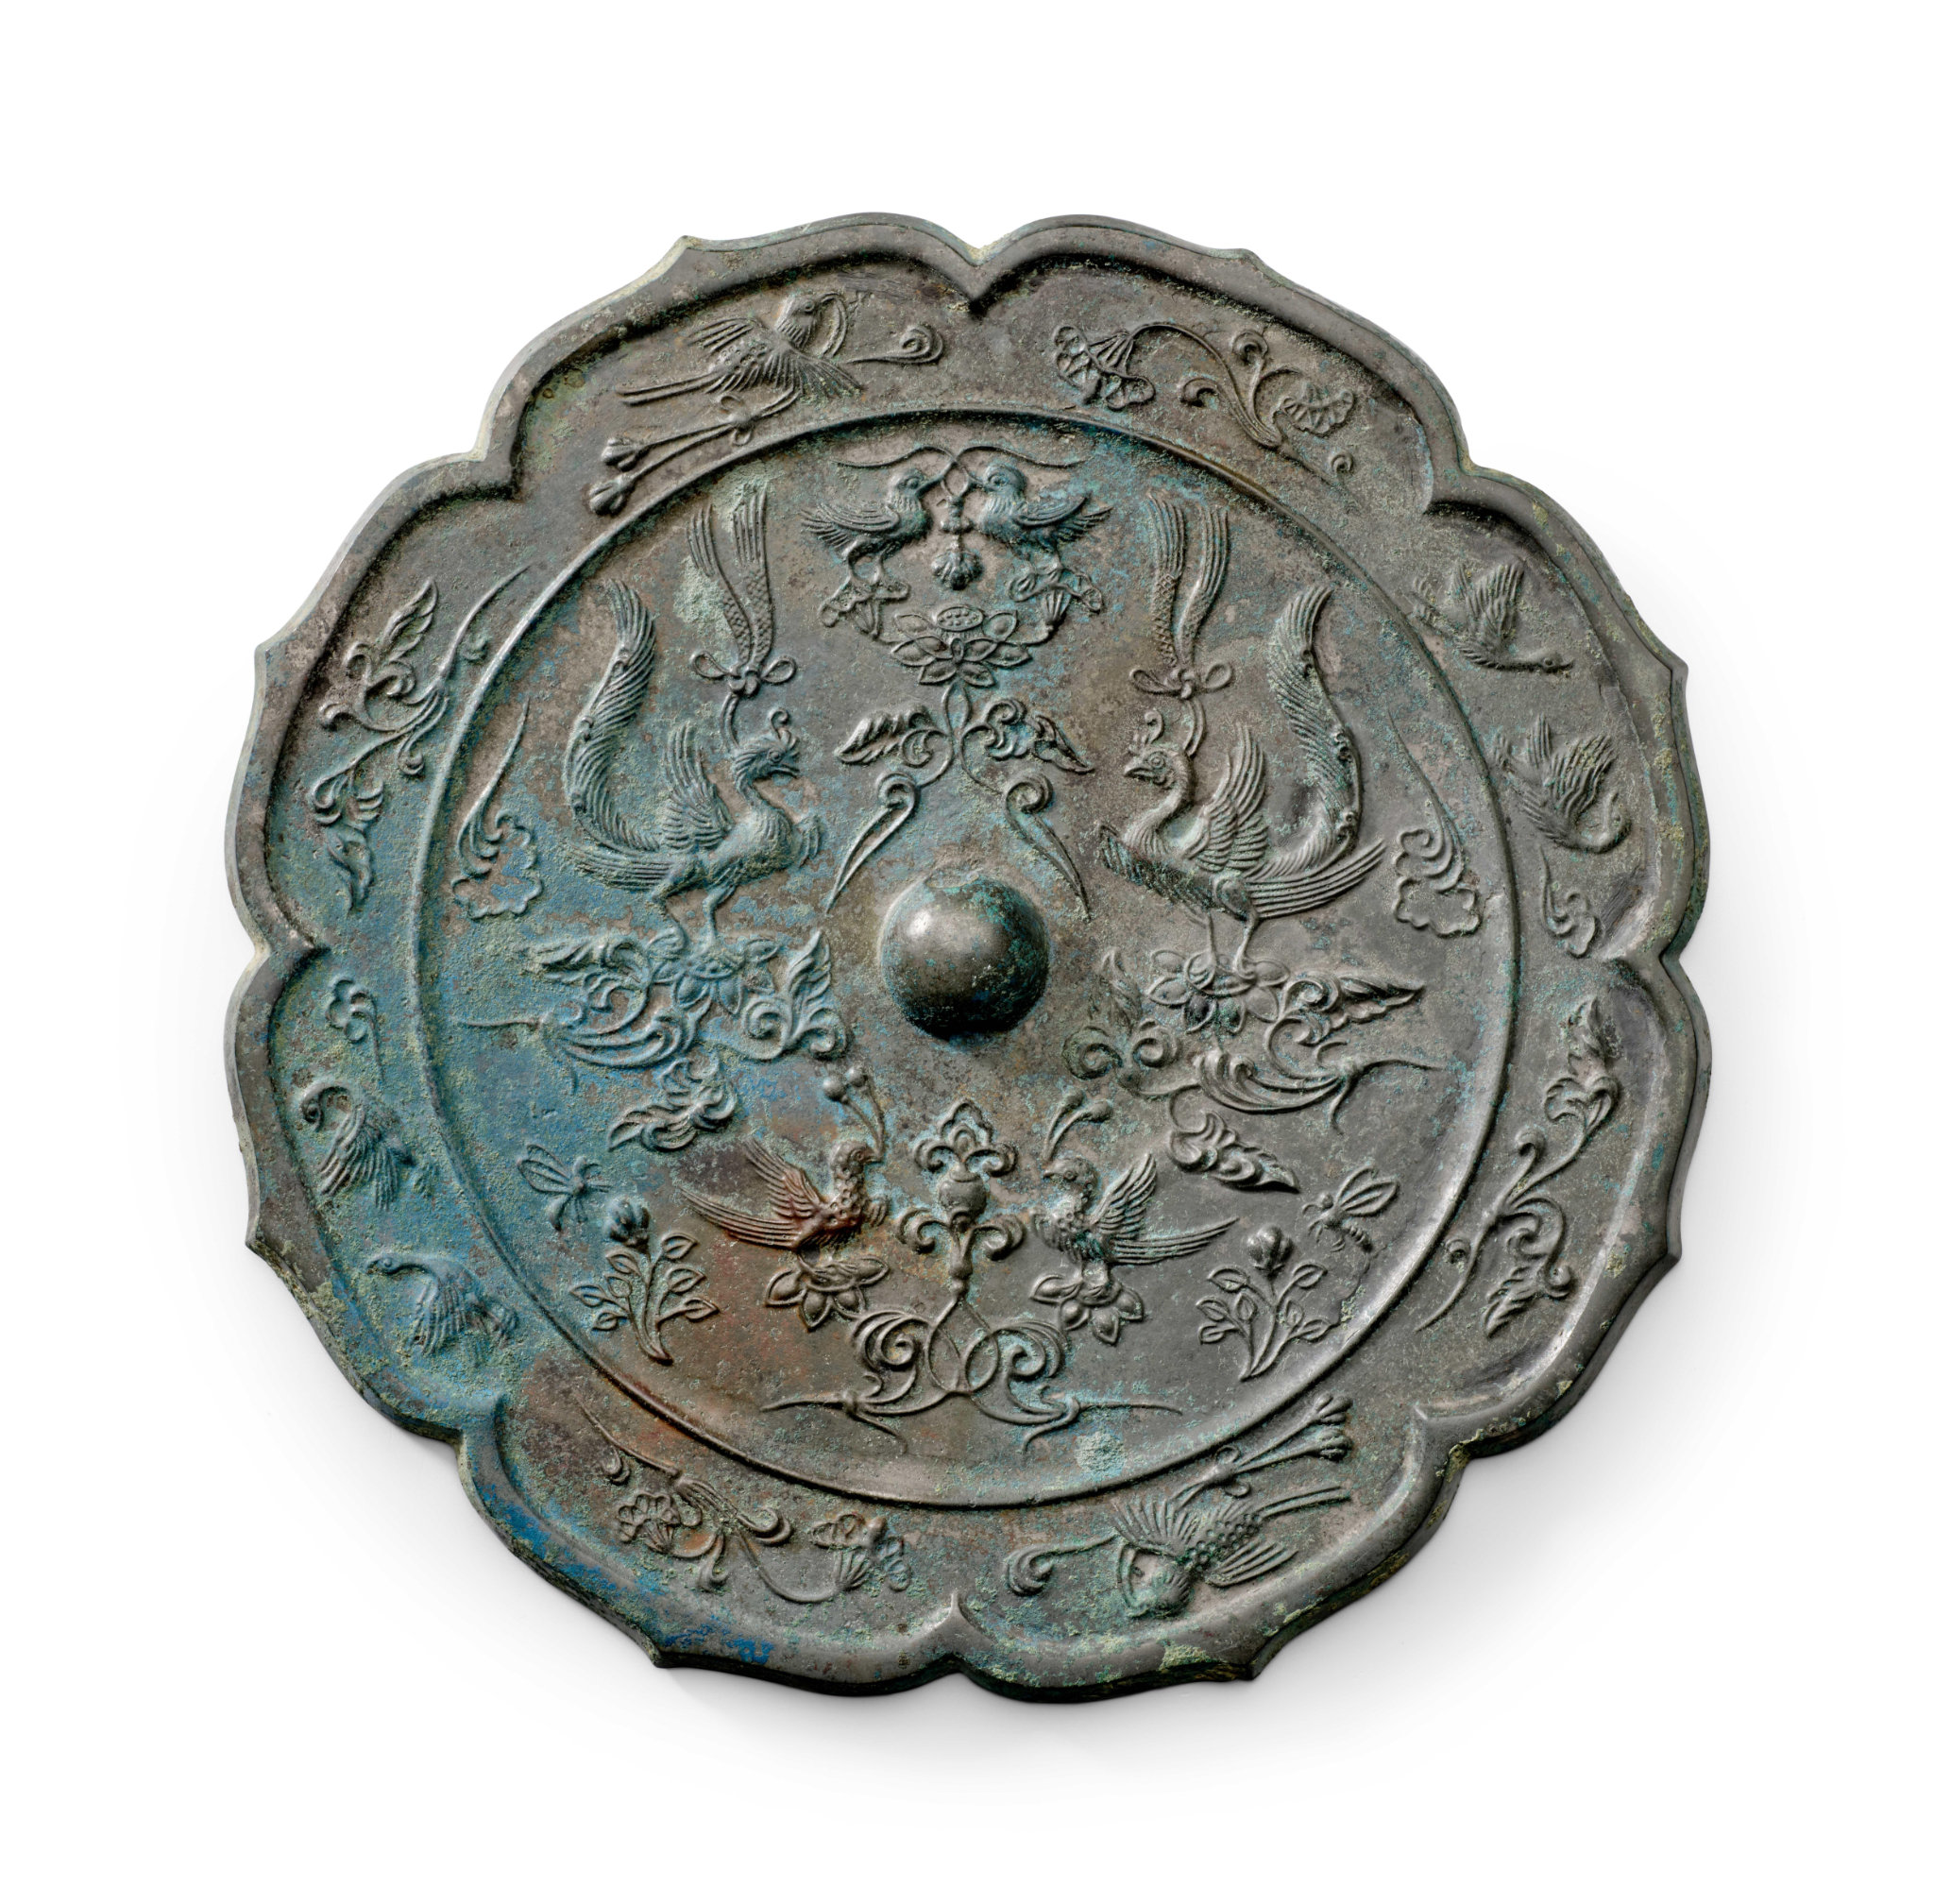 A large octafoil silvered bronze mirror Tang Dynasty